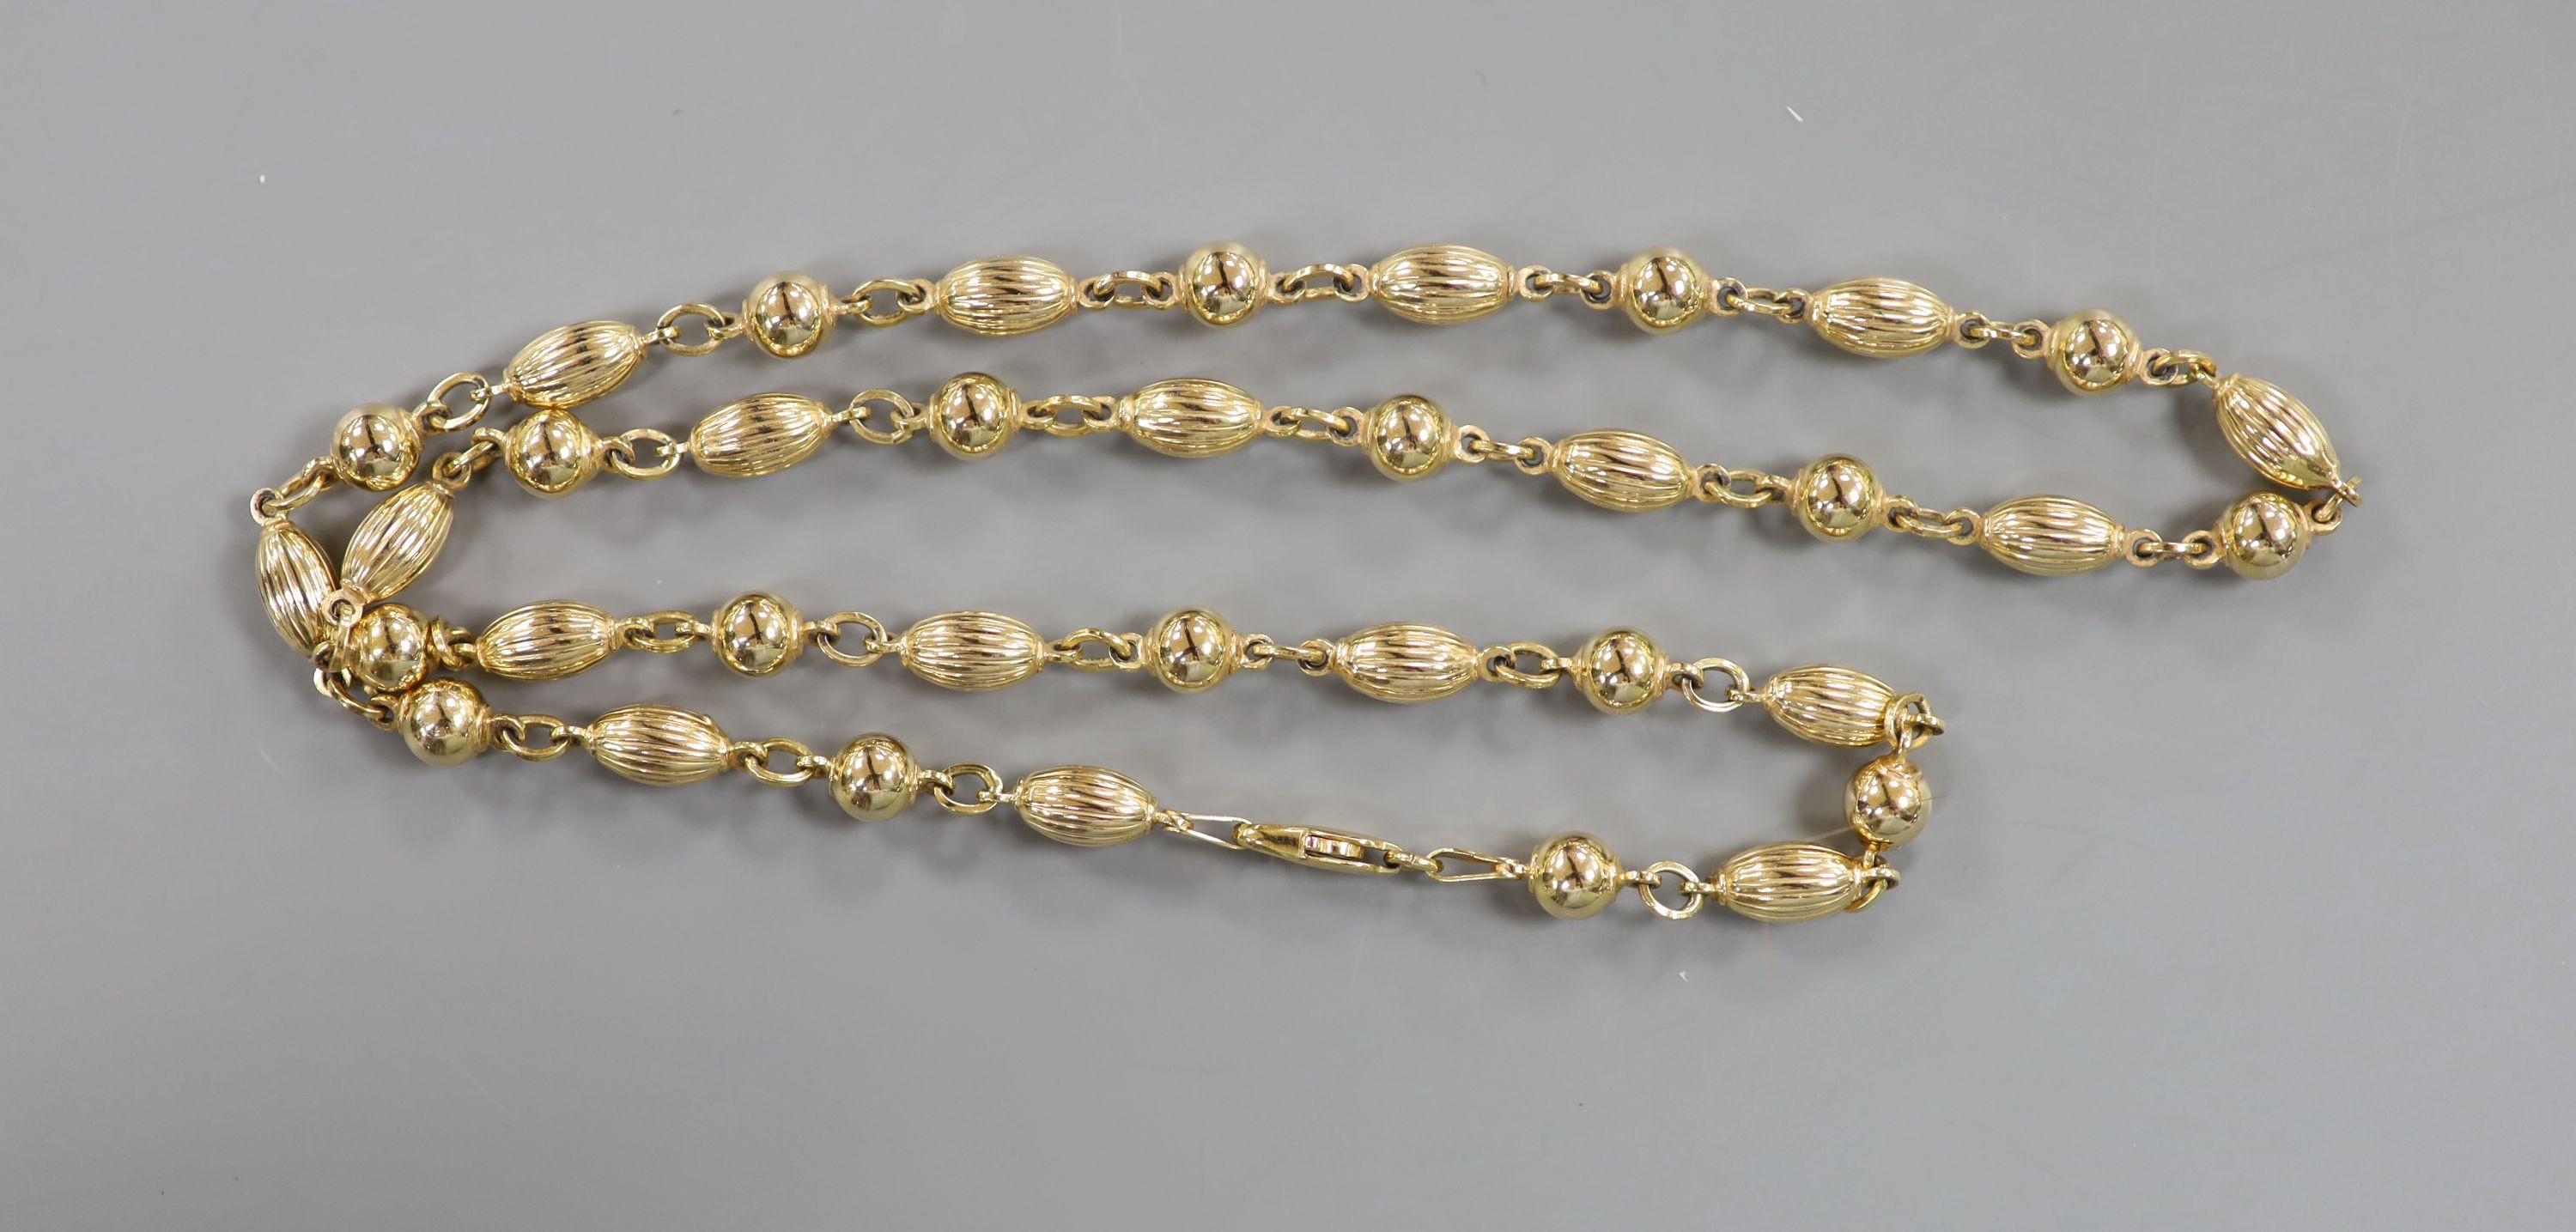 An Italian 375 Uno-A-Erre fluted bead and sphere link chain, 48cm, 16.5 grams.